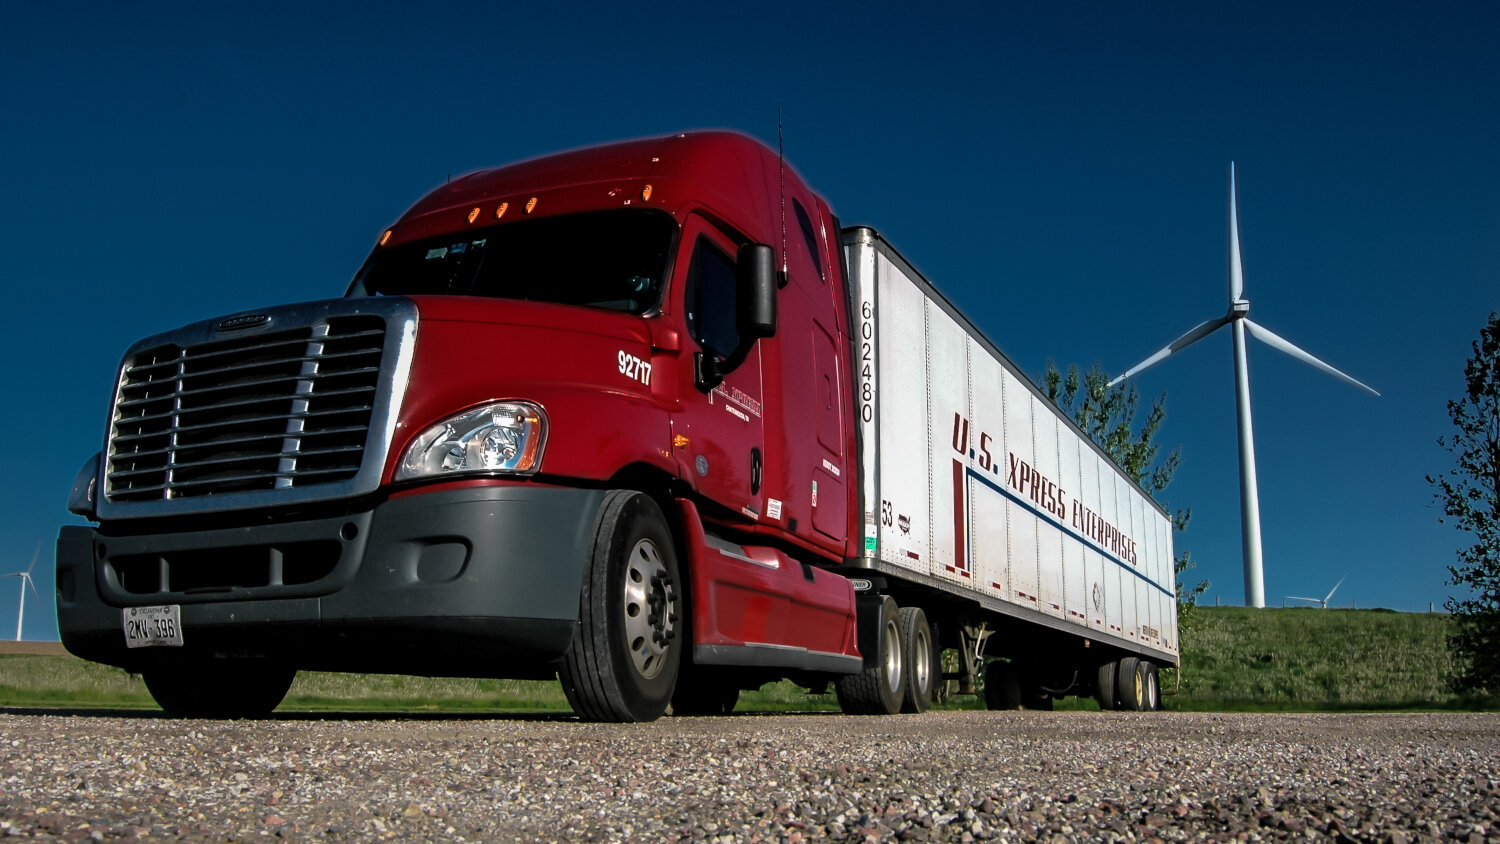 Demand for trucking services has “plateaued” in the last four to six weeks, though “we’ve not necessarily seen things getting worse,” according to the CEO of a leading national truckload carrier. (Photo: Jim Allen/FreightWaves)